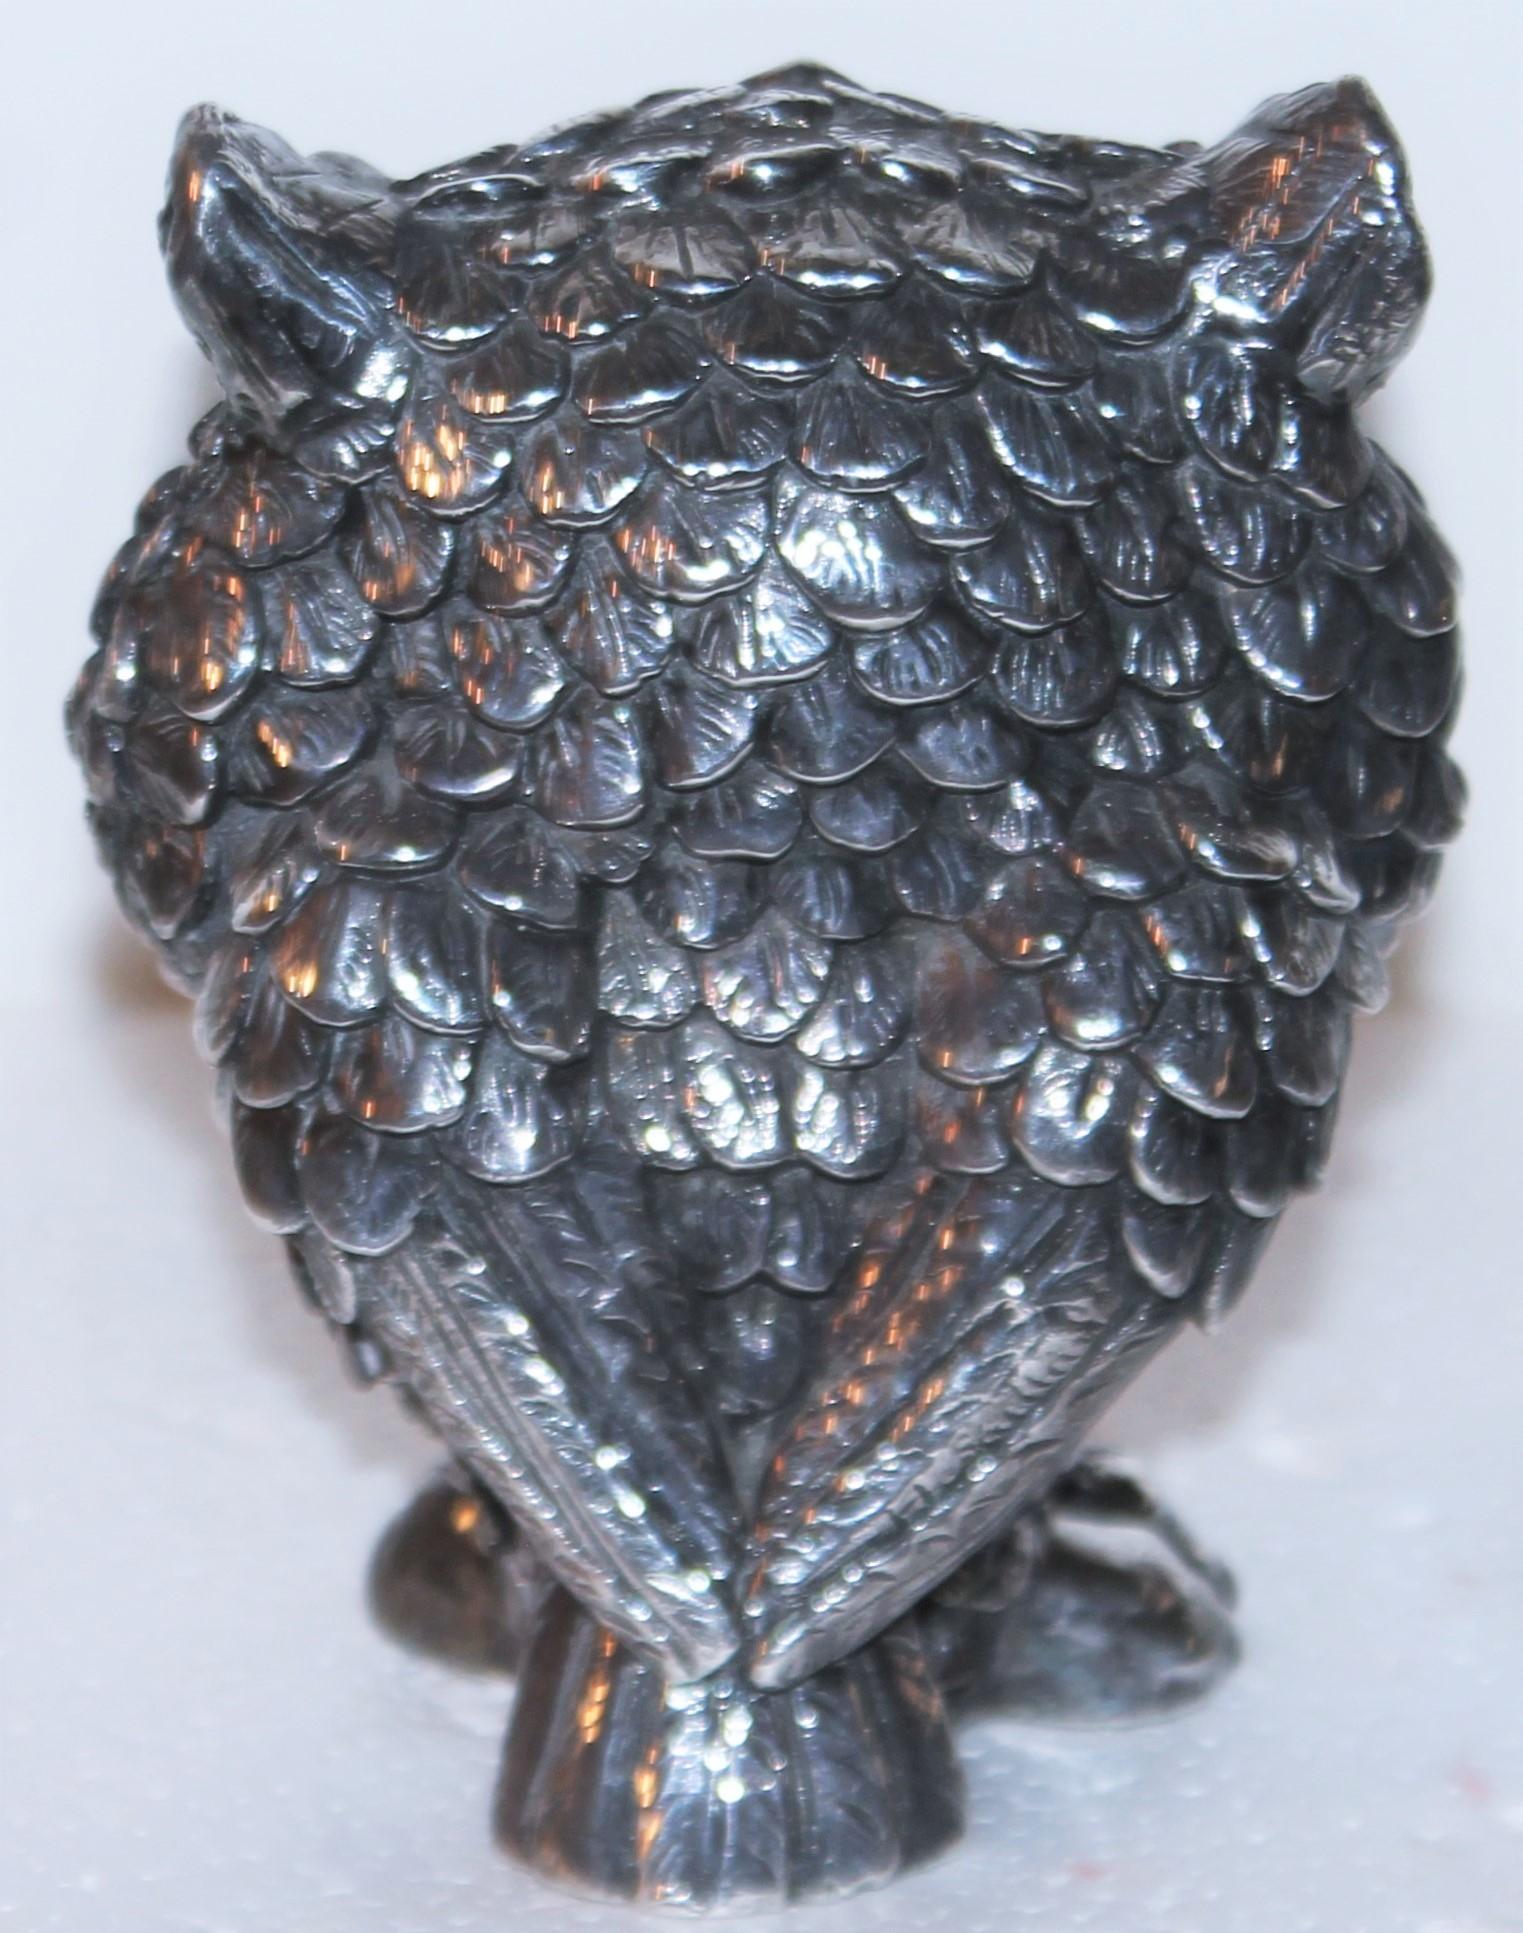 20th C Sterling silver owl Sculpture. Marked 925 and Signed.